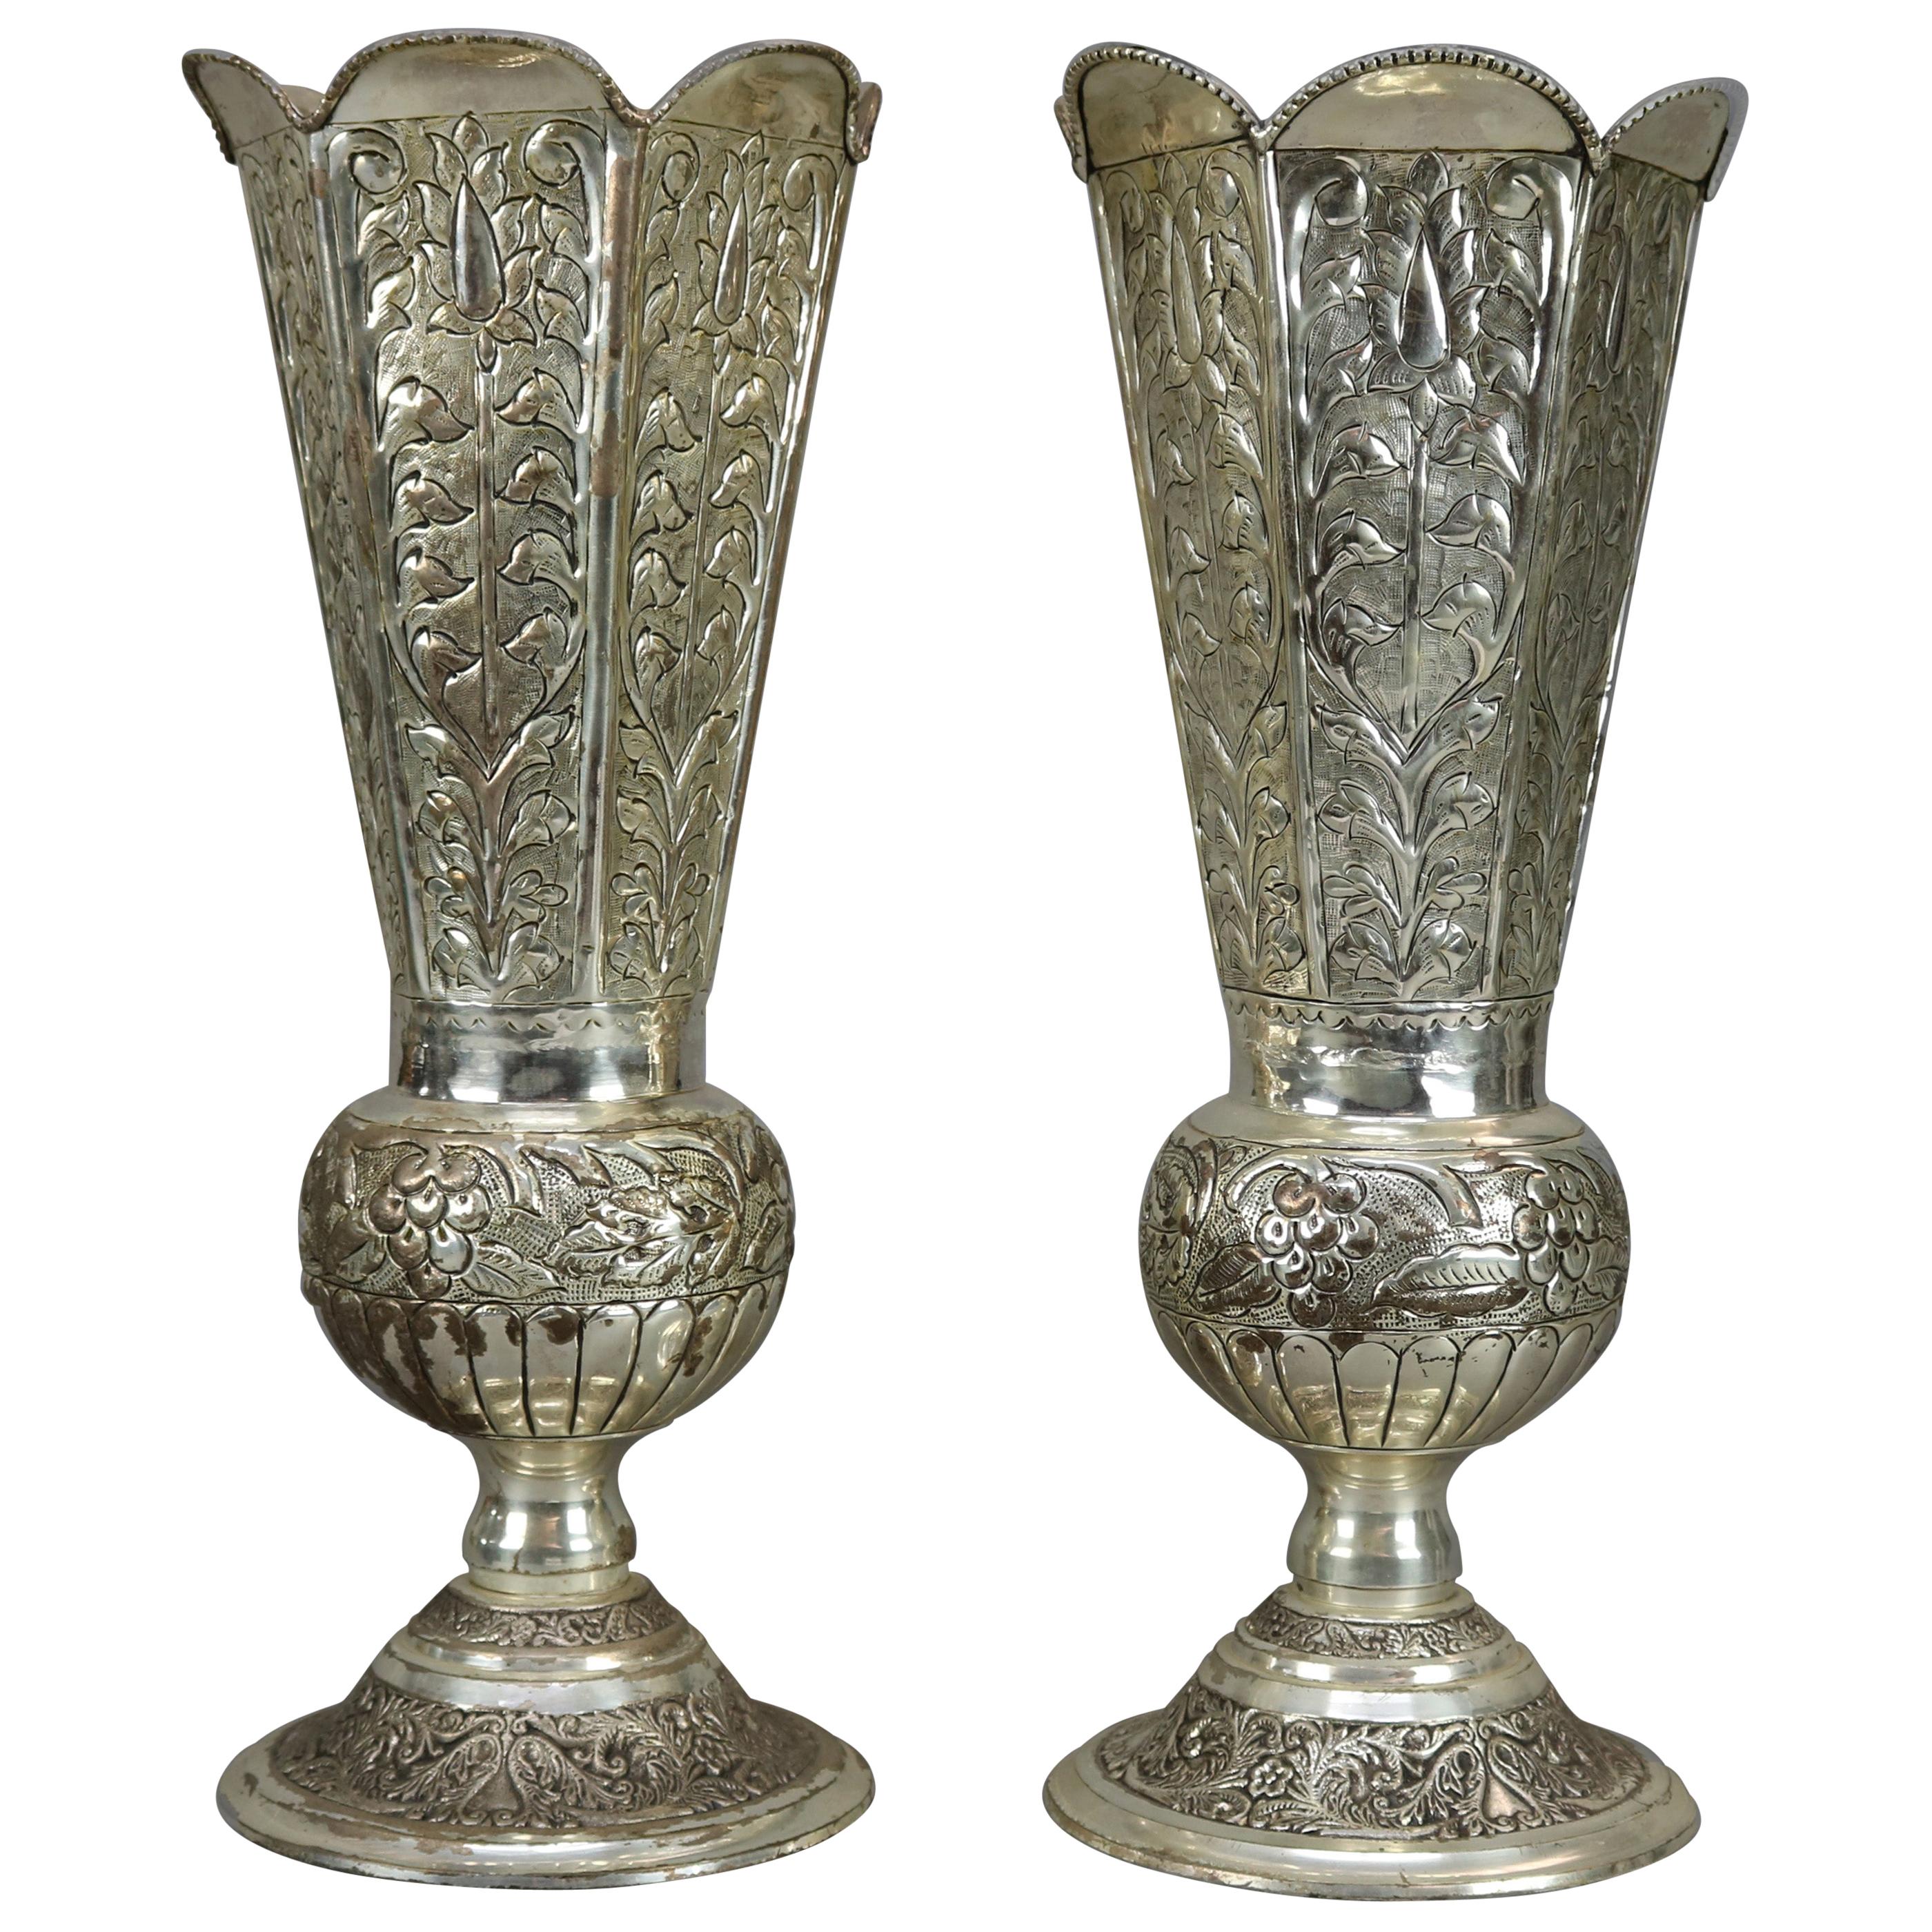 Pair of Oversized Vintage Silver Plate Floral Embossed Footed Vases 20th Century